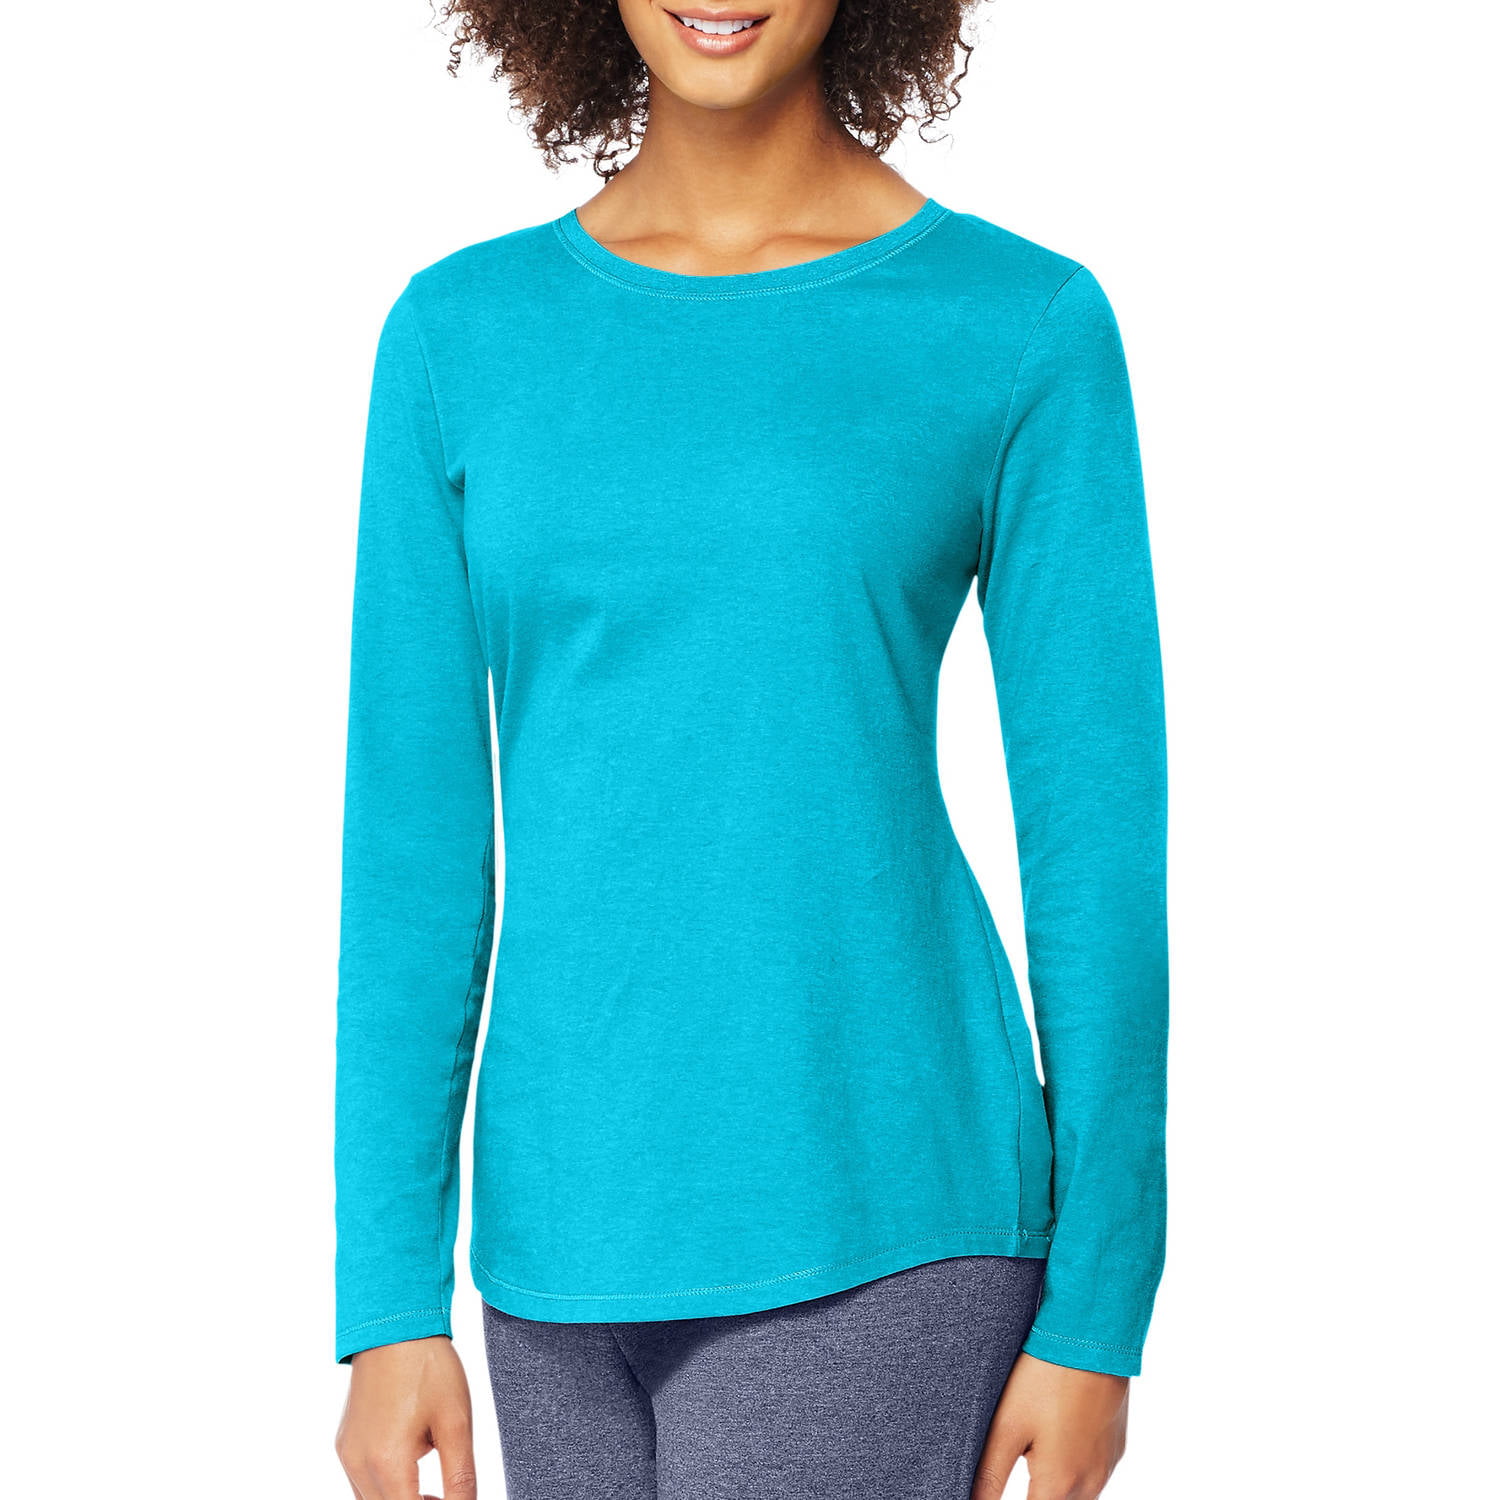 go Accor Appeal to be attractive Women's Long Sleeve T-shirt - Walmart.com